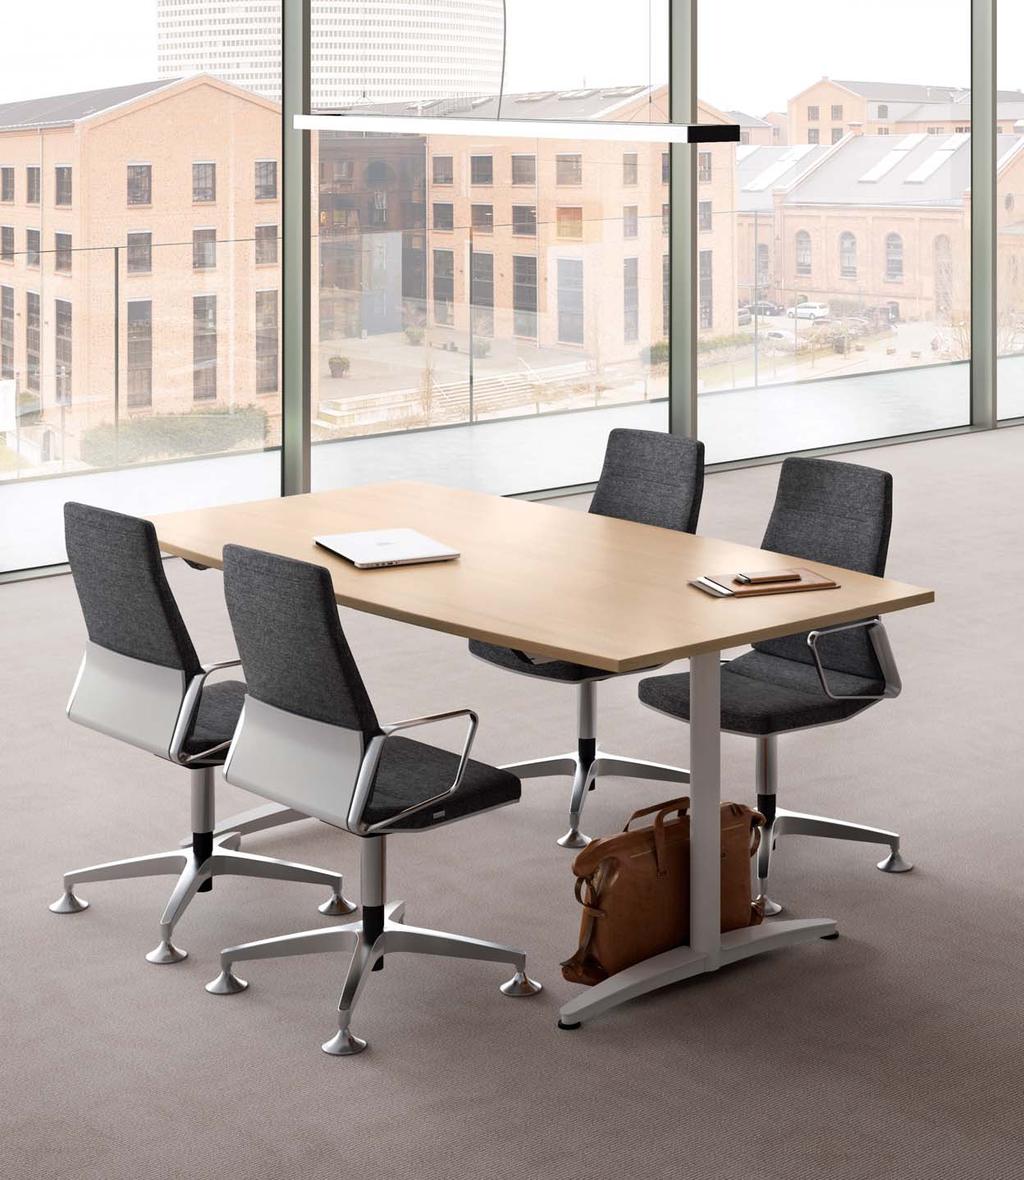 CALDO provides the ideal meeting solution for many spaces and adapts to the size of your spatial conditions given.